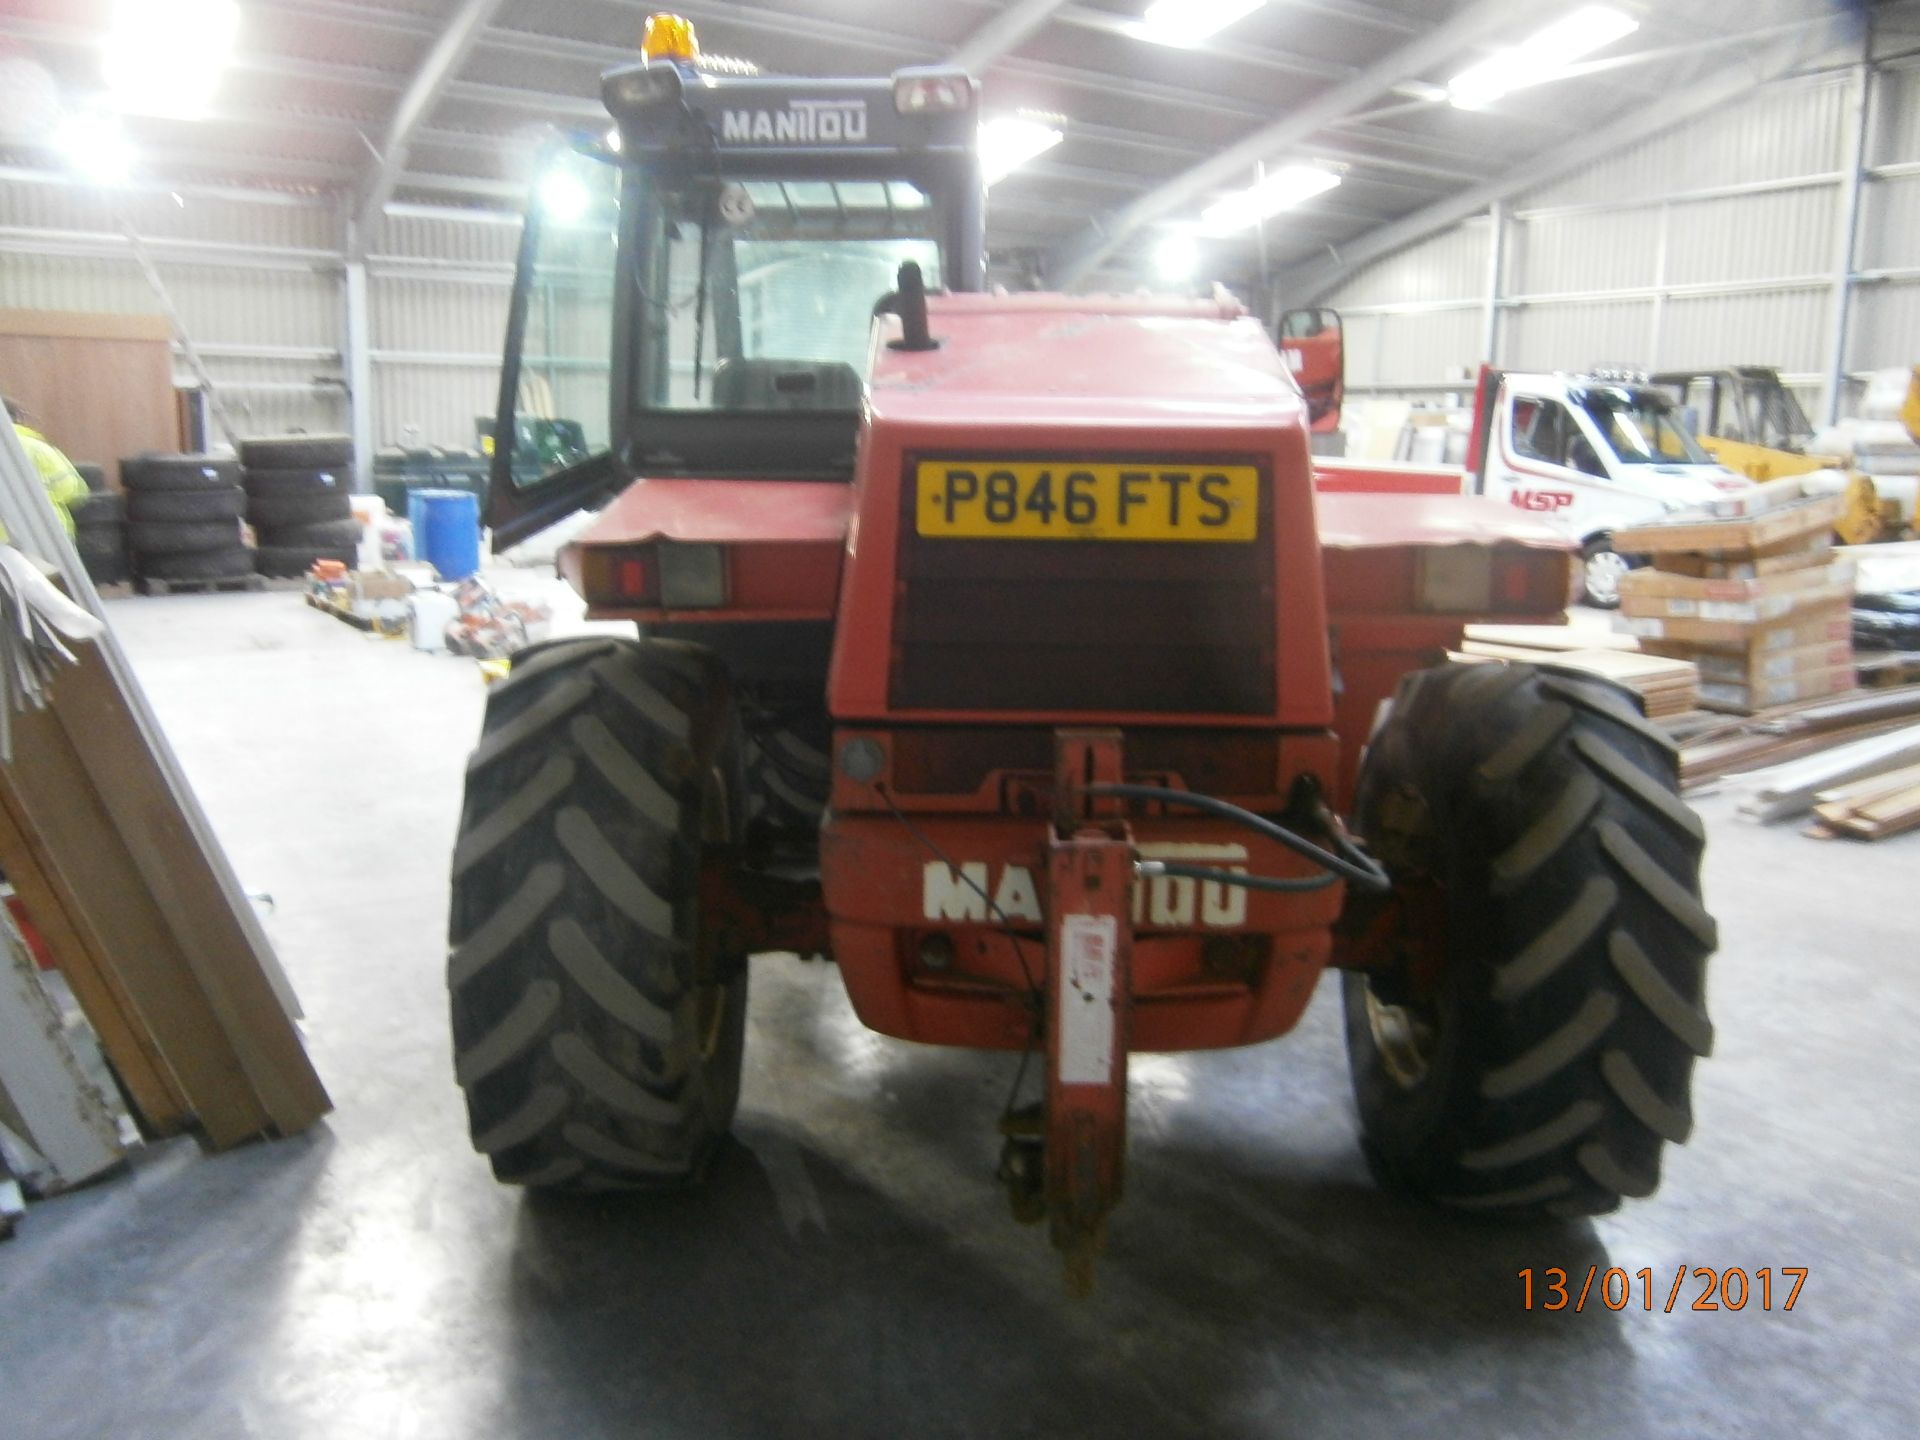 1 No. P846 FTS - Manitou MLT628 Turbo Telehandler - cw Manifix Hitch - Displaying 8,246 Hours -